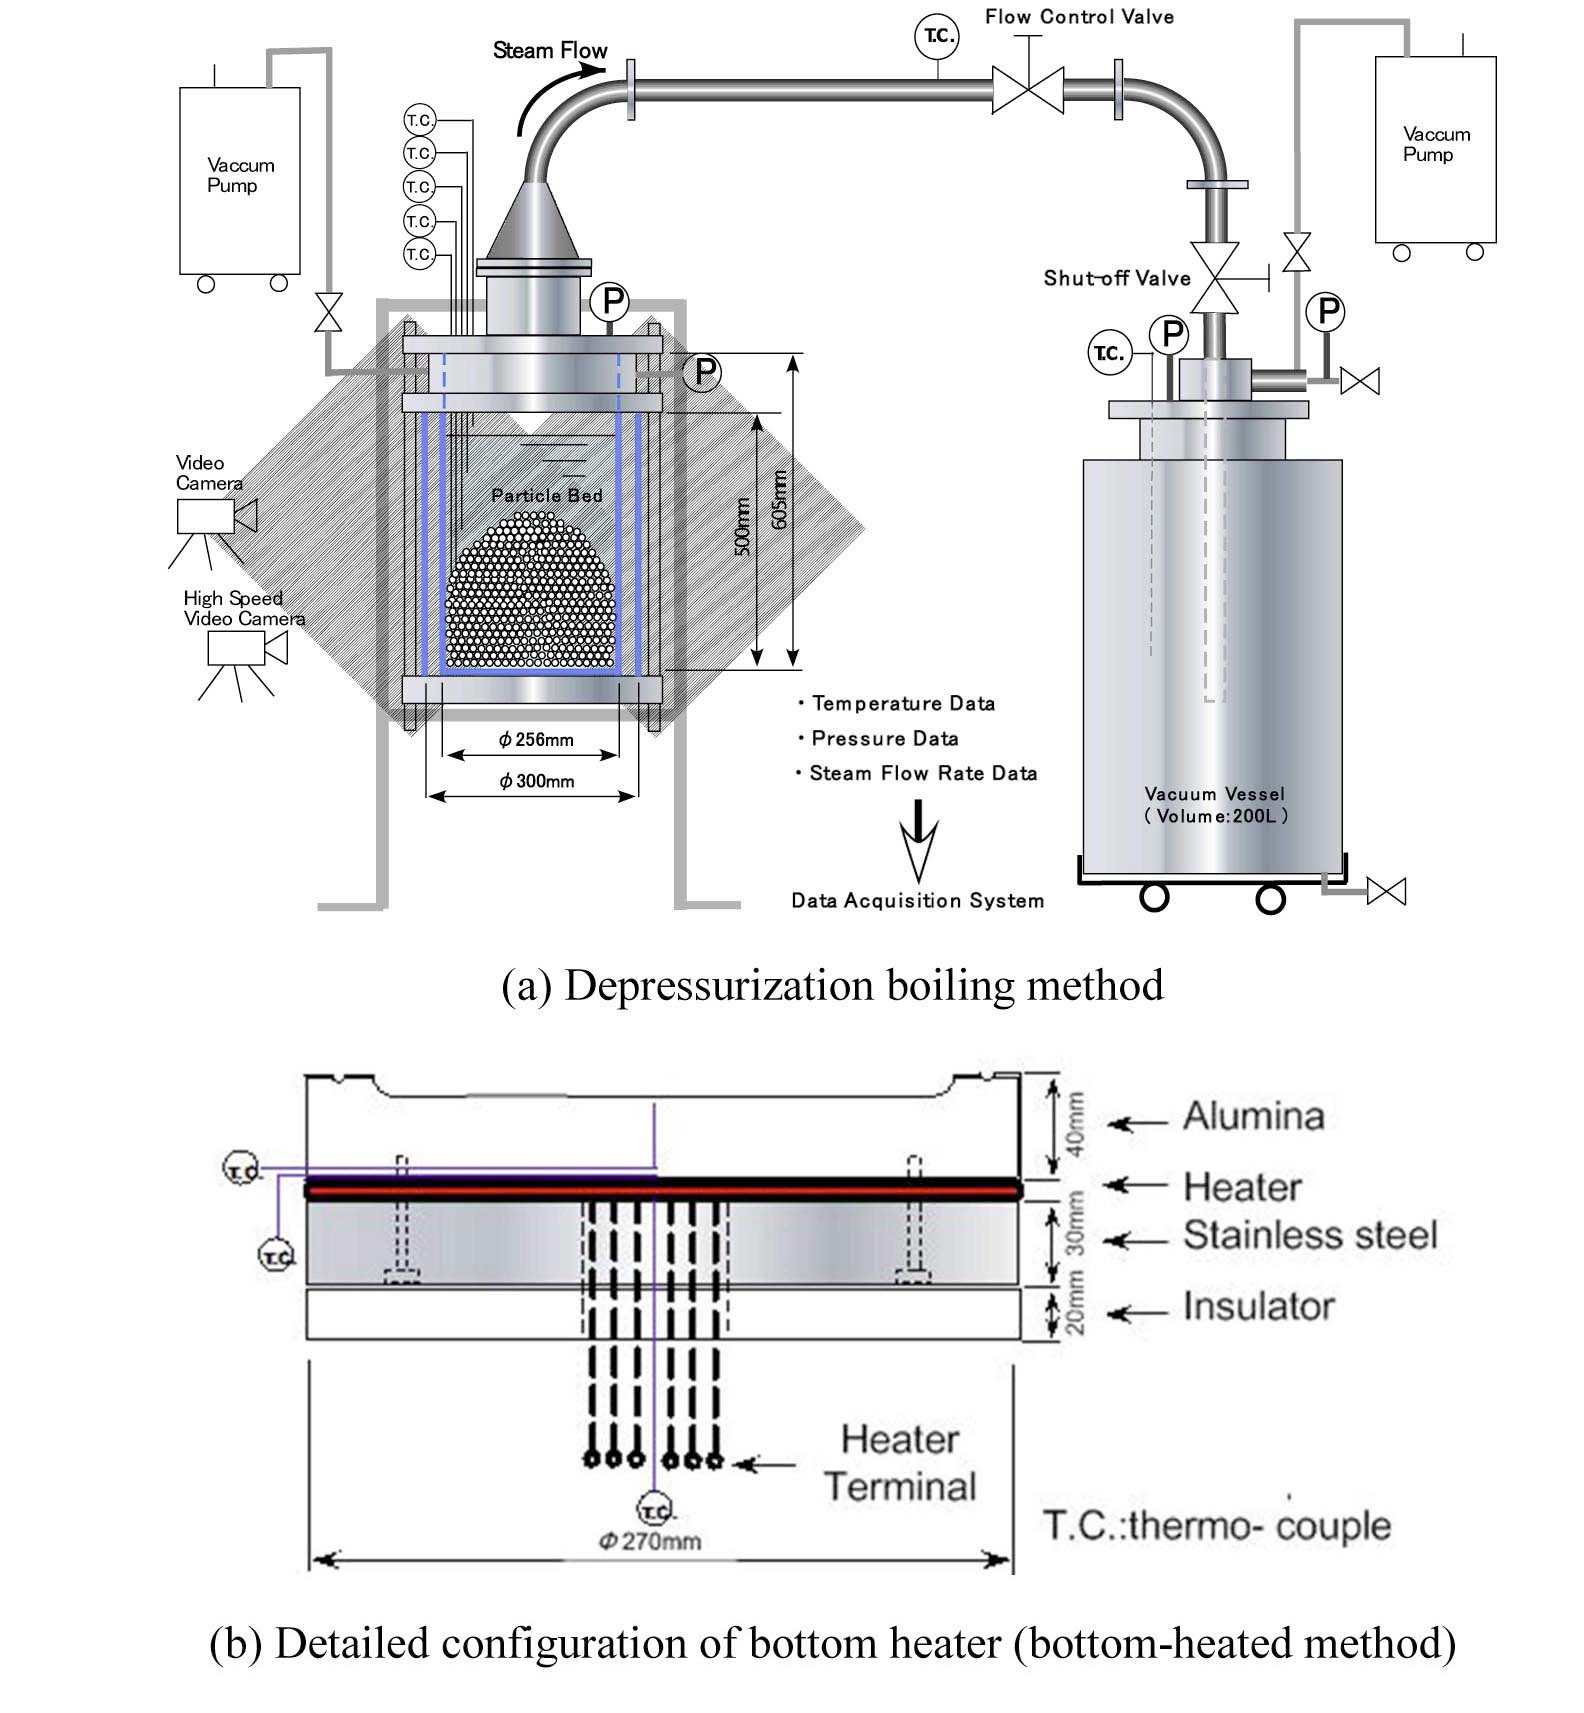 Schematic Diagram of Setup for Leveling Experiments using Boiling Method